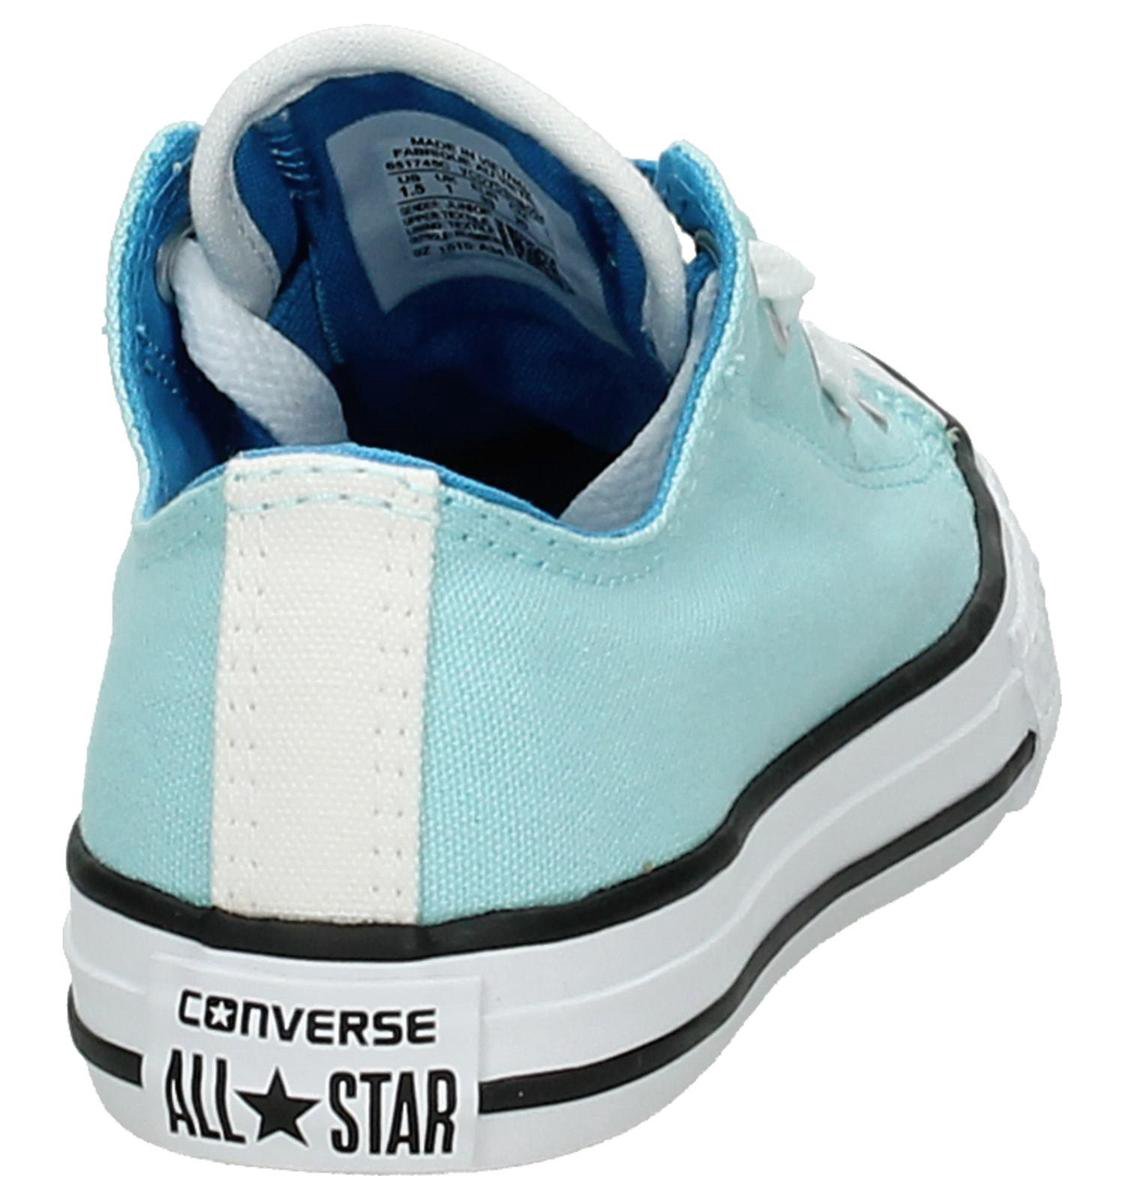 Converse Chuck Taylor All Star loopholes Slip - Sneakers - Meisjes - Maat  34 - Turquoise | bol.com